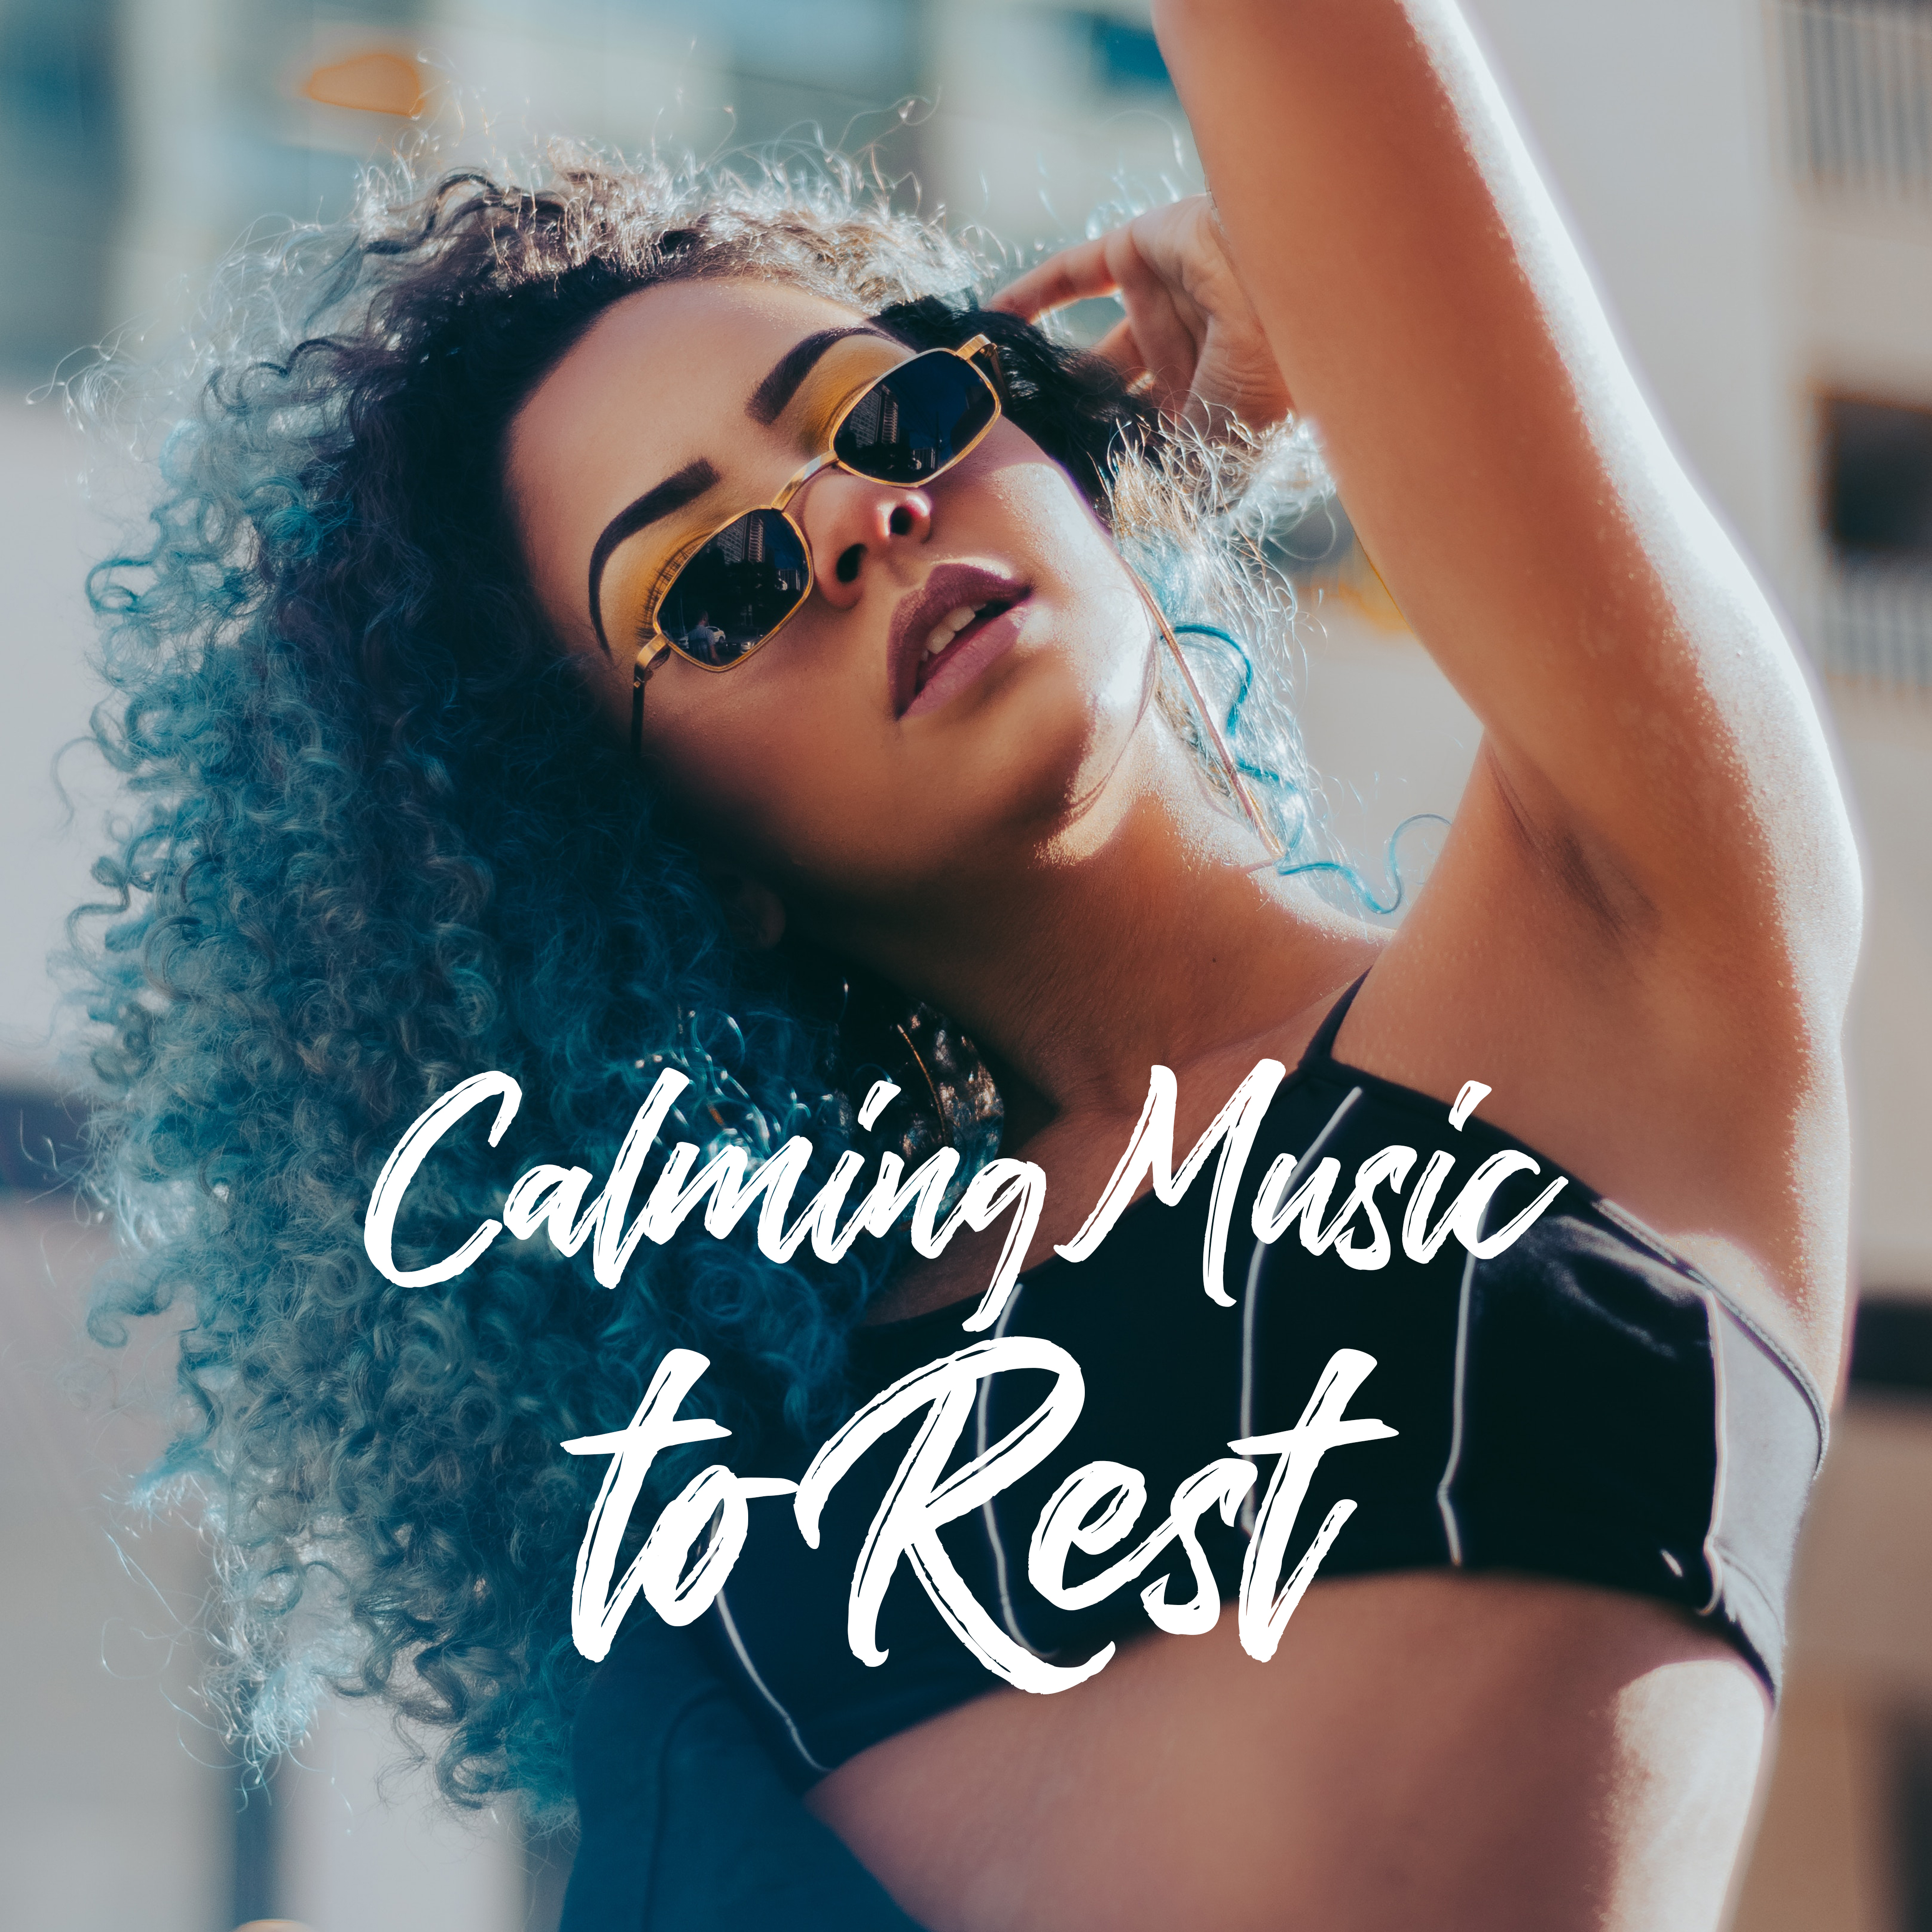 Calming Music to Rest